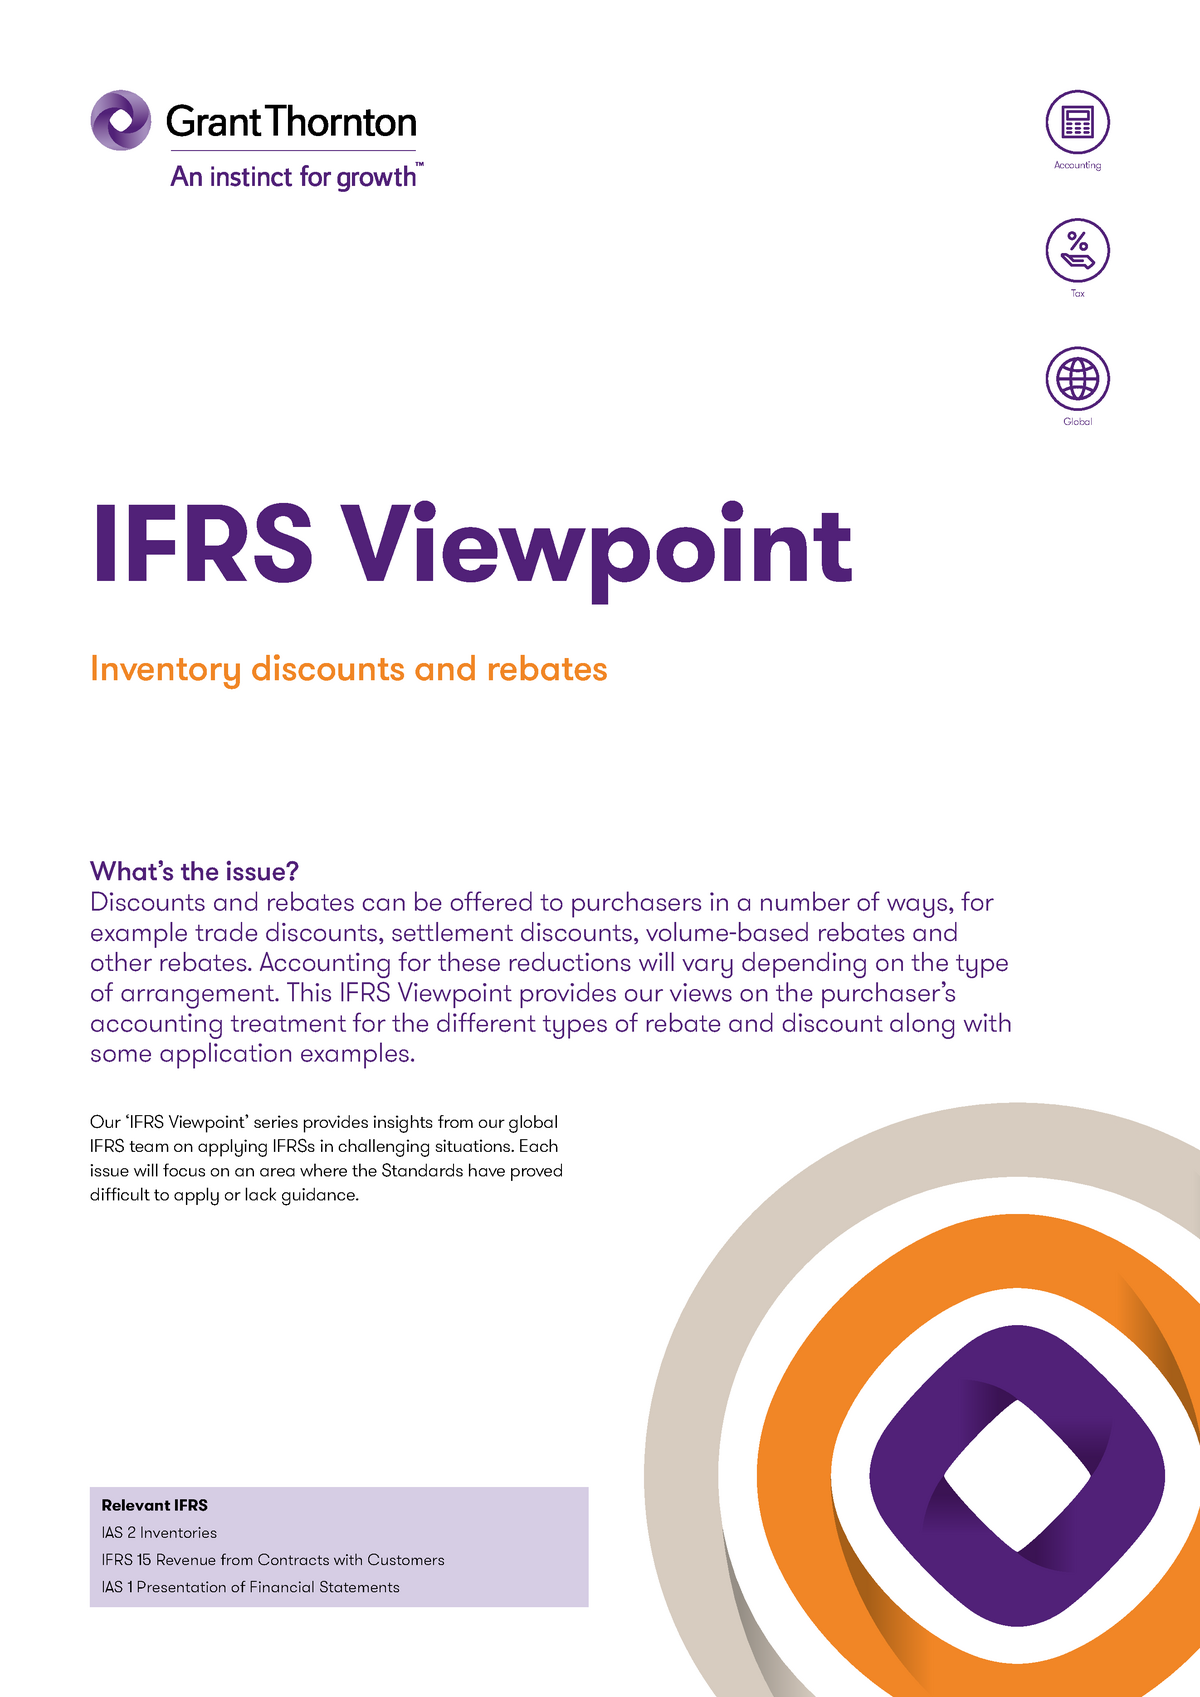 ifrs-viewpoint-3-inventory-discounts-and-rebates-inventory-discounts